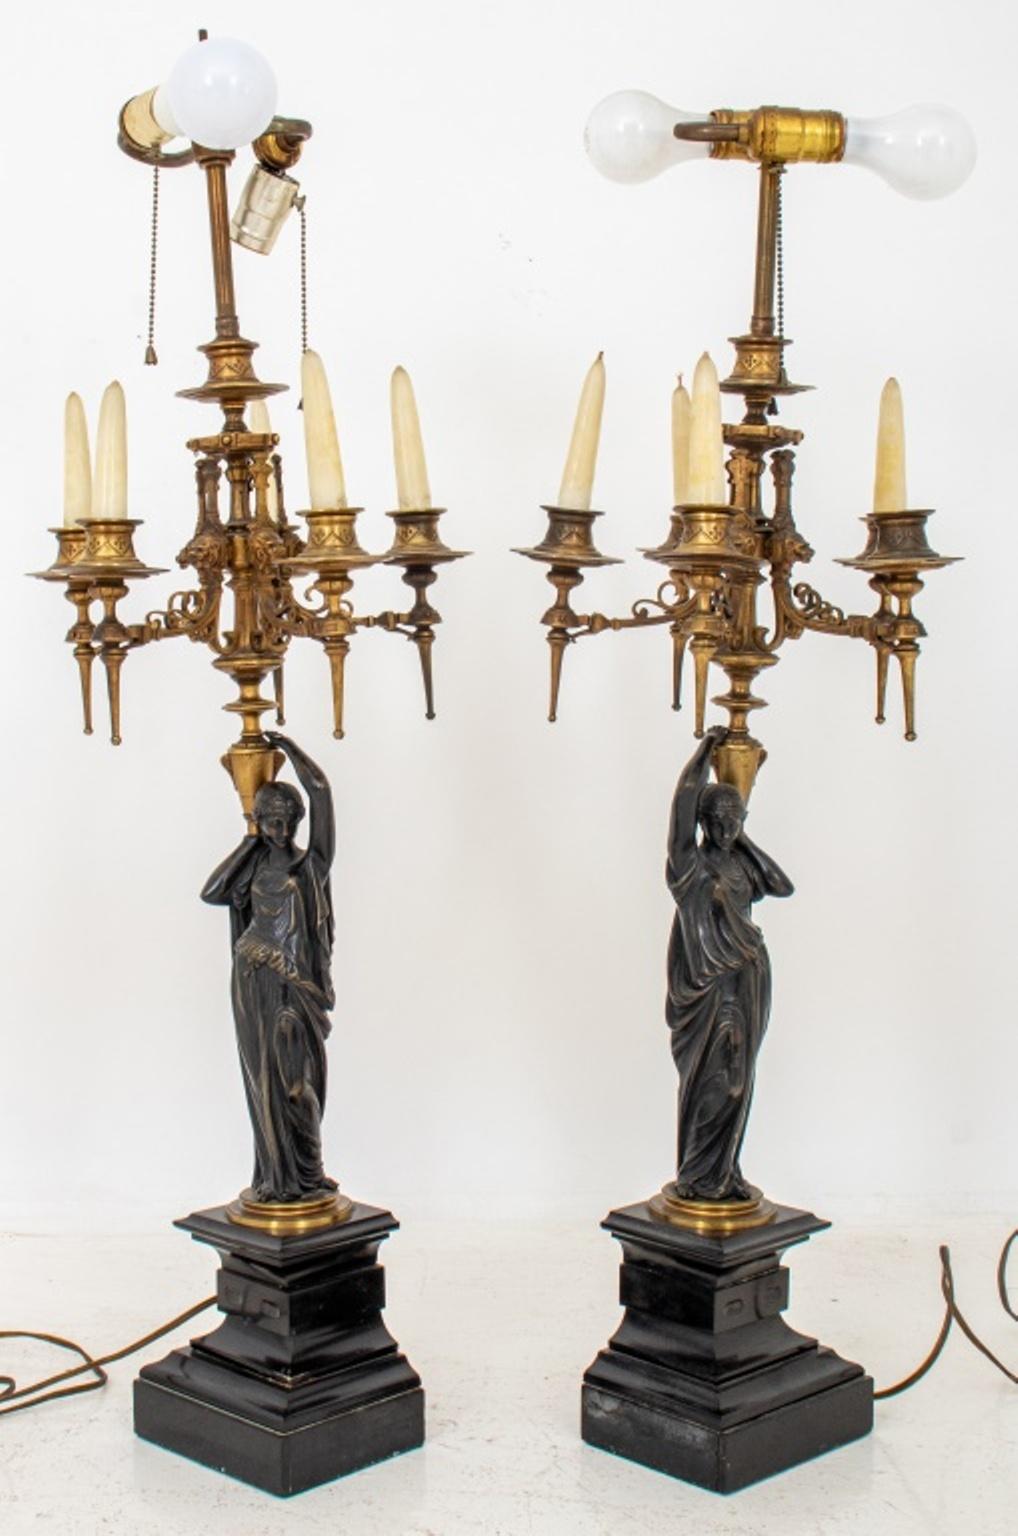 Napoleon III Neoclassical Gout Grec gilded and patinated bronze six-arm candelabra in the form of draped Roman vestals supporting amphorae in the manner of Hippolyte Ferrat (French, 1822 - 1882) issuing candle arms above black noir de Belge